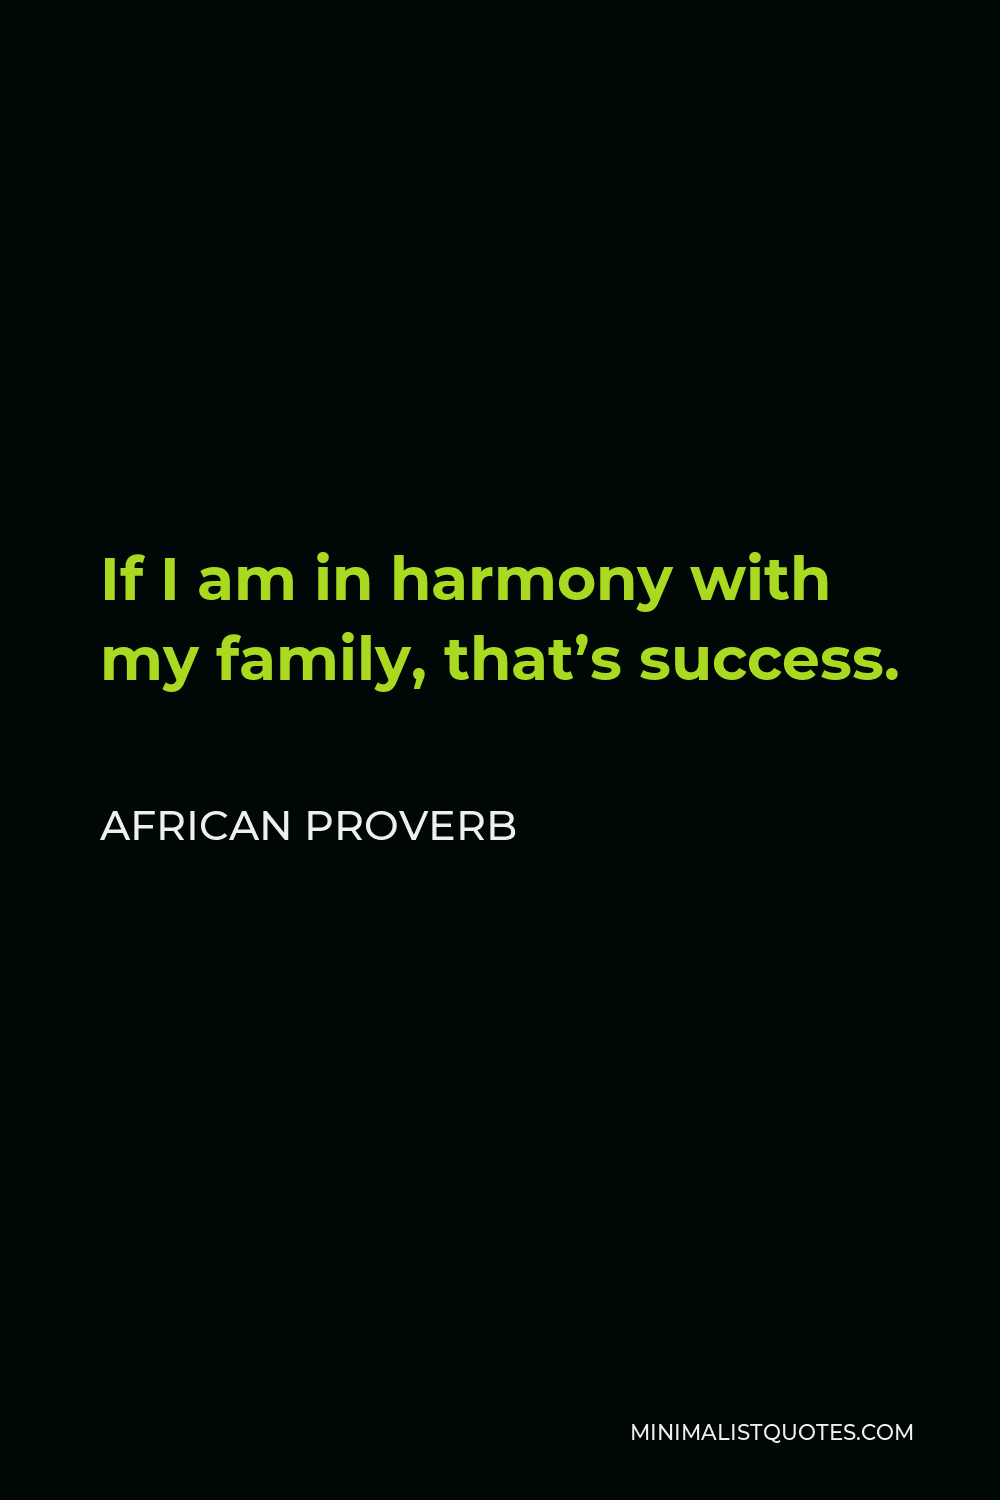 African Proverb Quote - If I am in harmony with my family, that’s success.